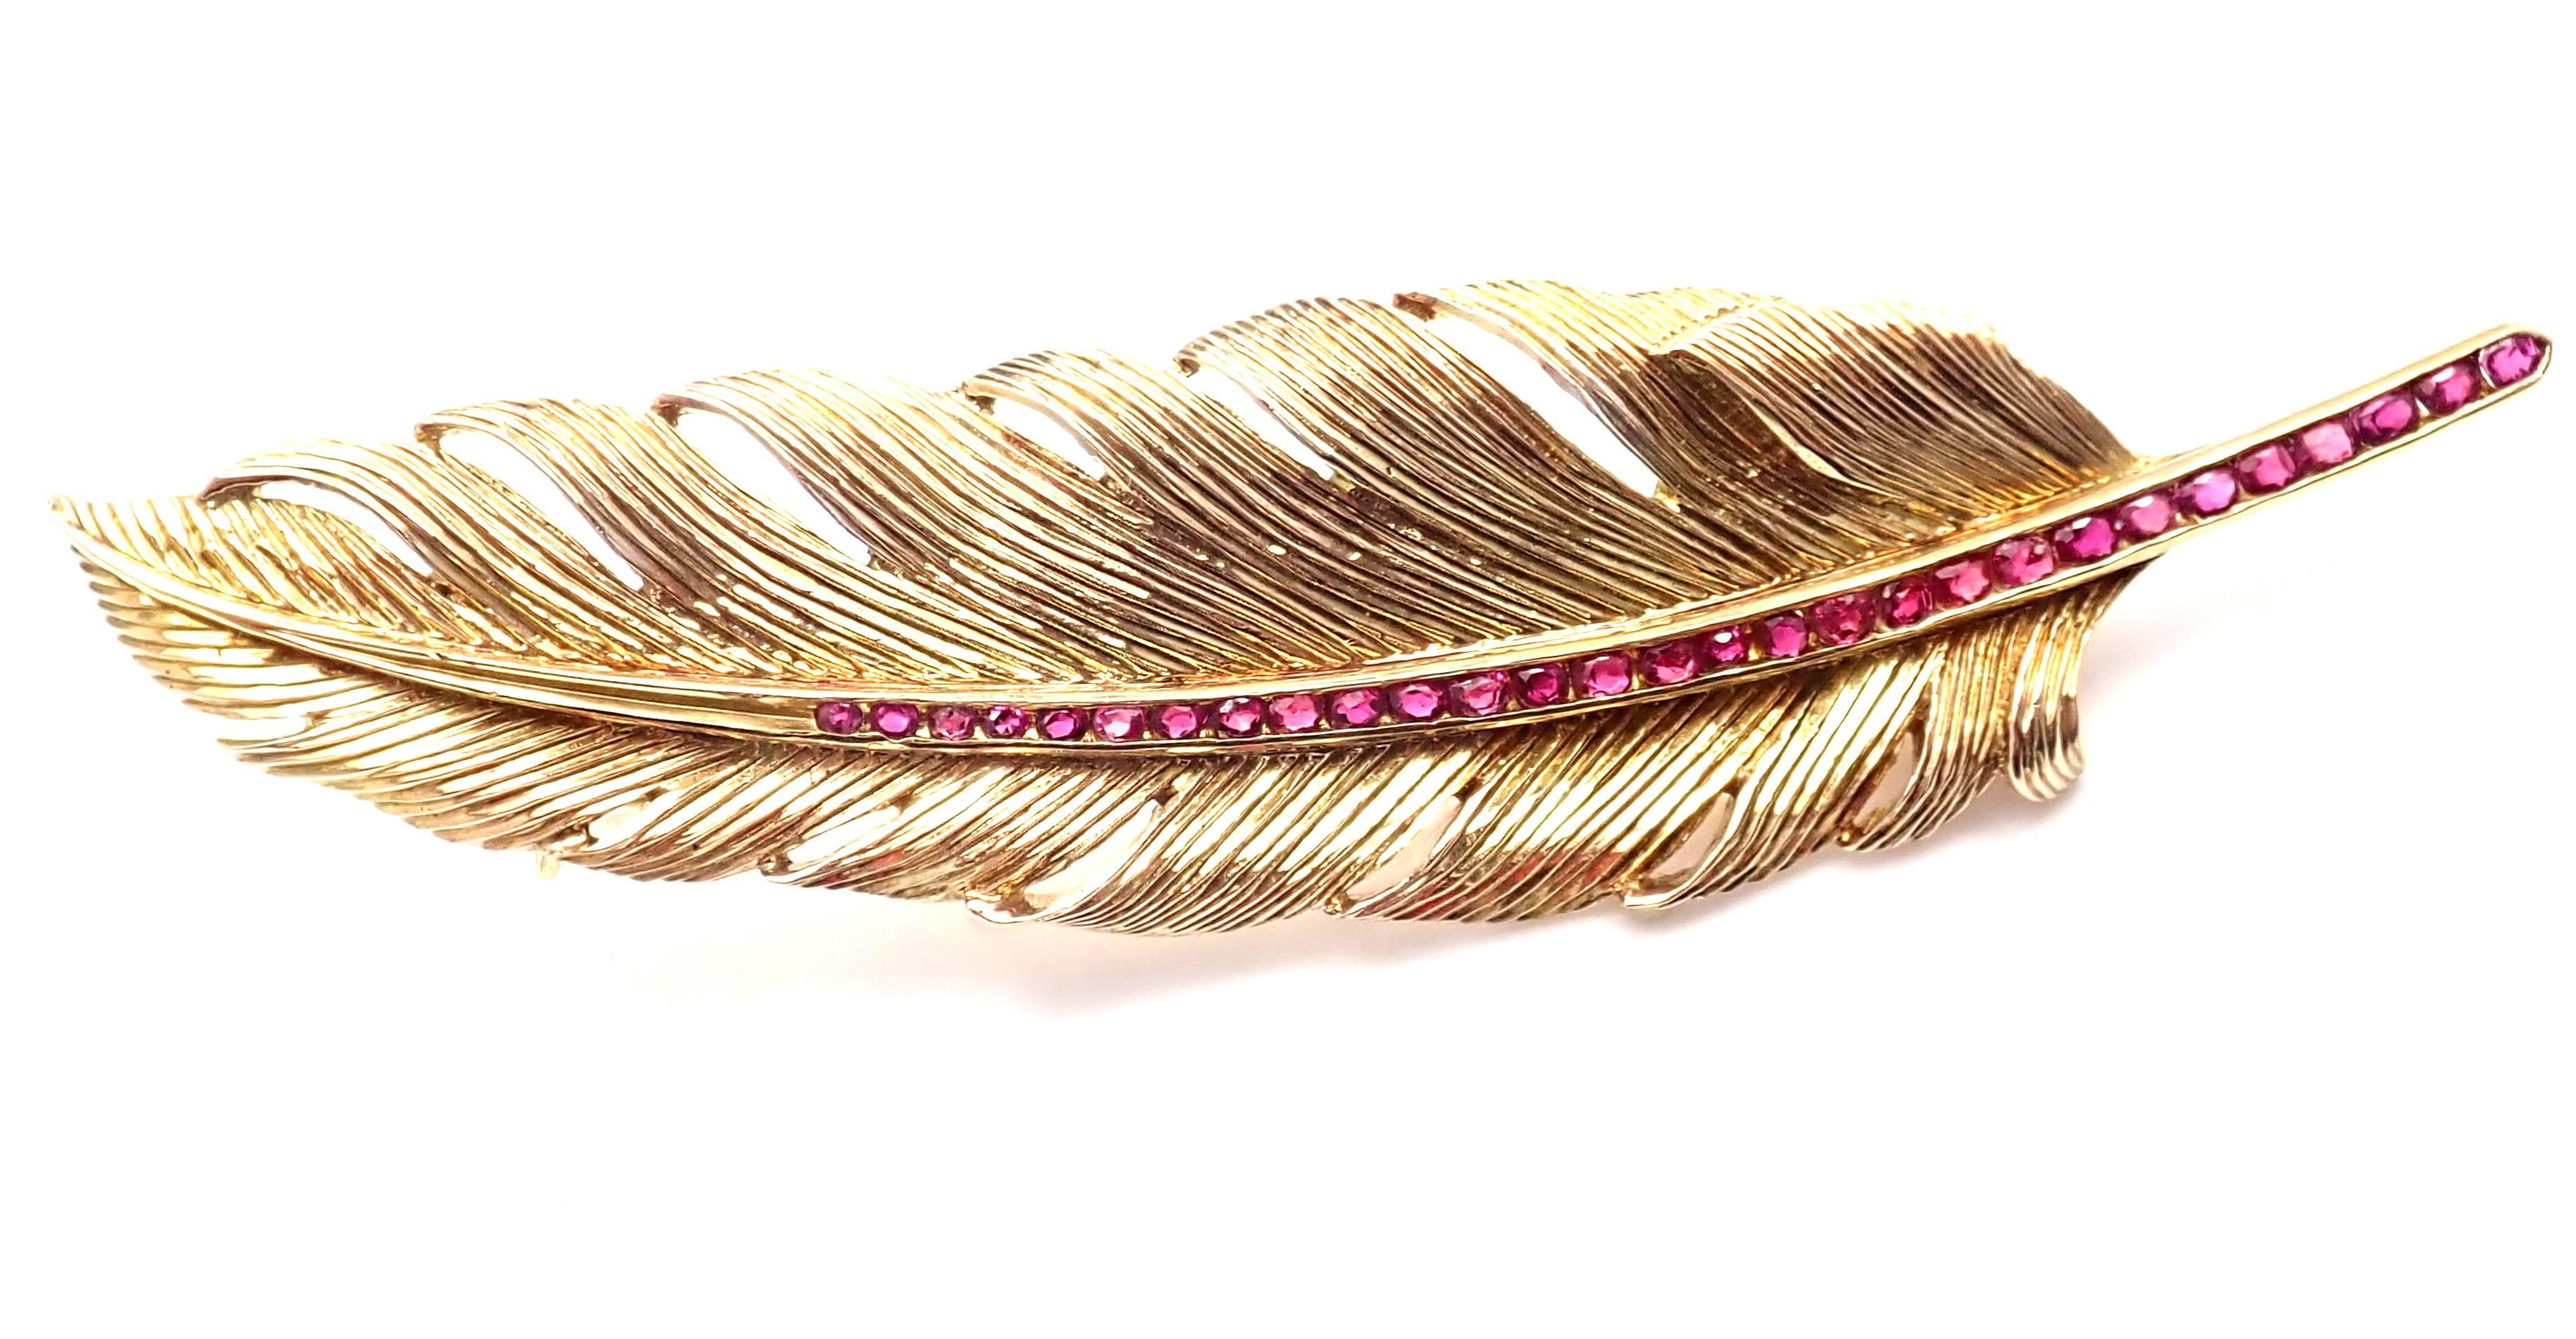 14k Yellow Gold Vintage Feather Ruby Pins Brooches by Raymond Yard.
With 29 round rubies total weight approx. 1ct
Details:
Weight: 16.8 grams
Measurements: 3 1/4